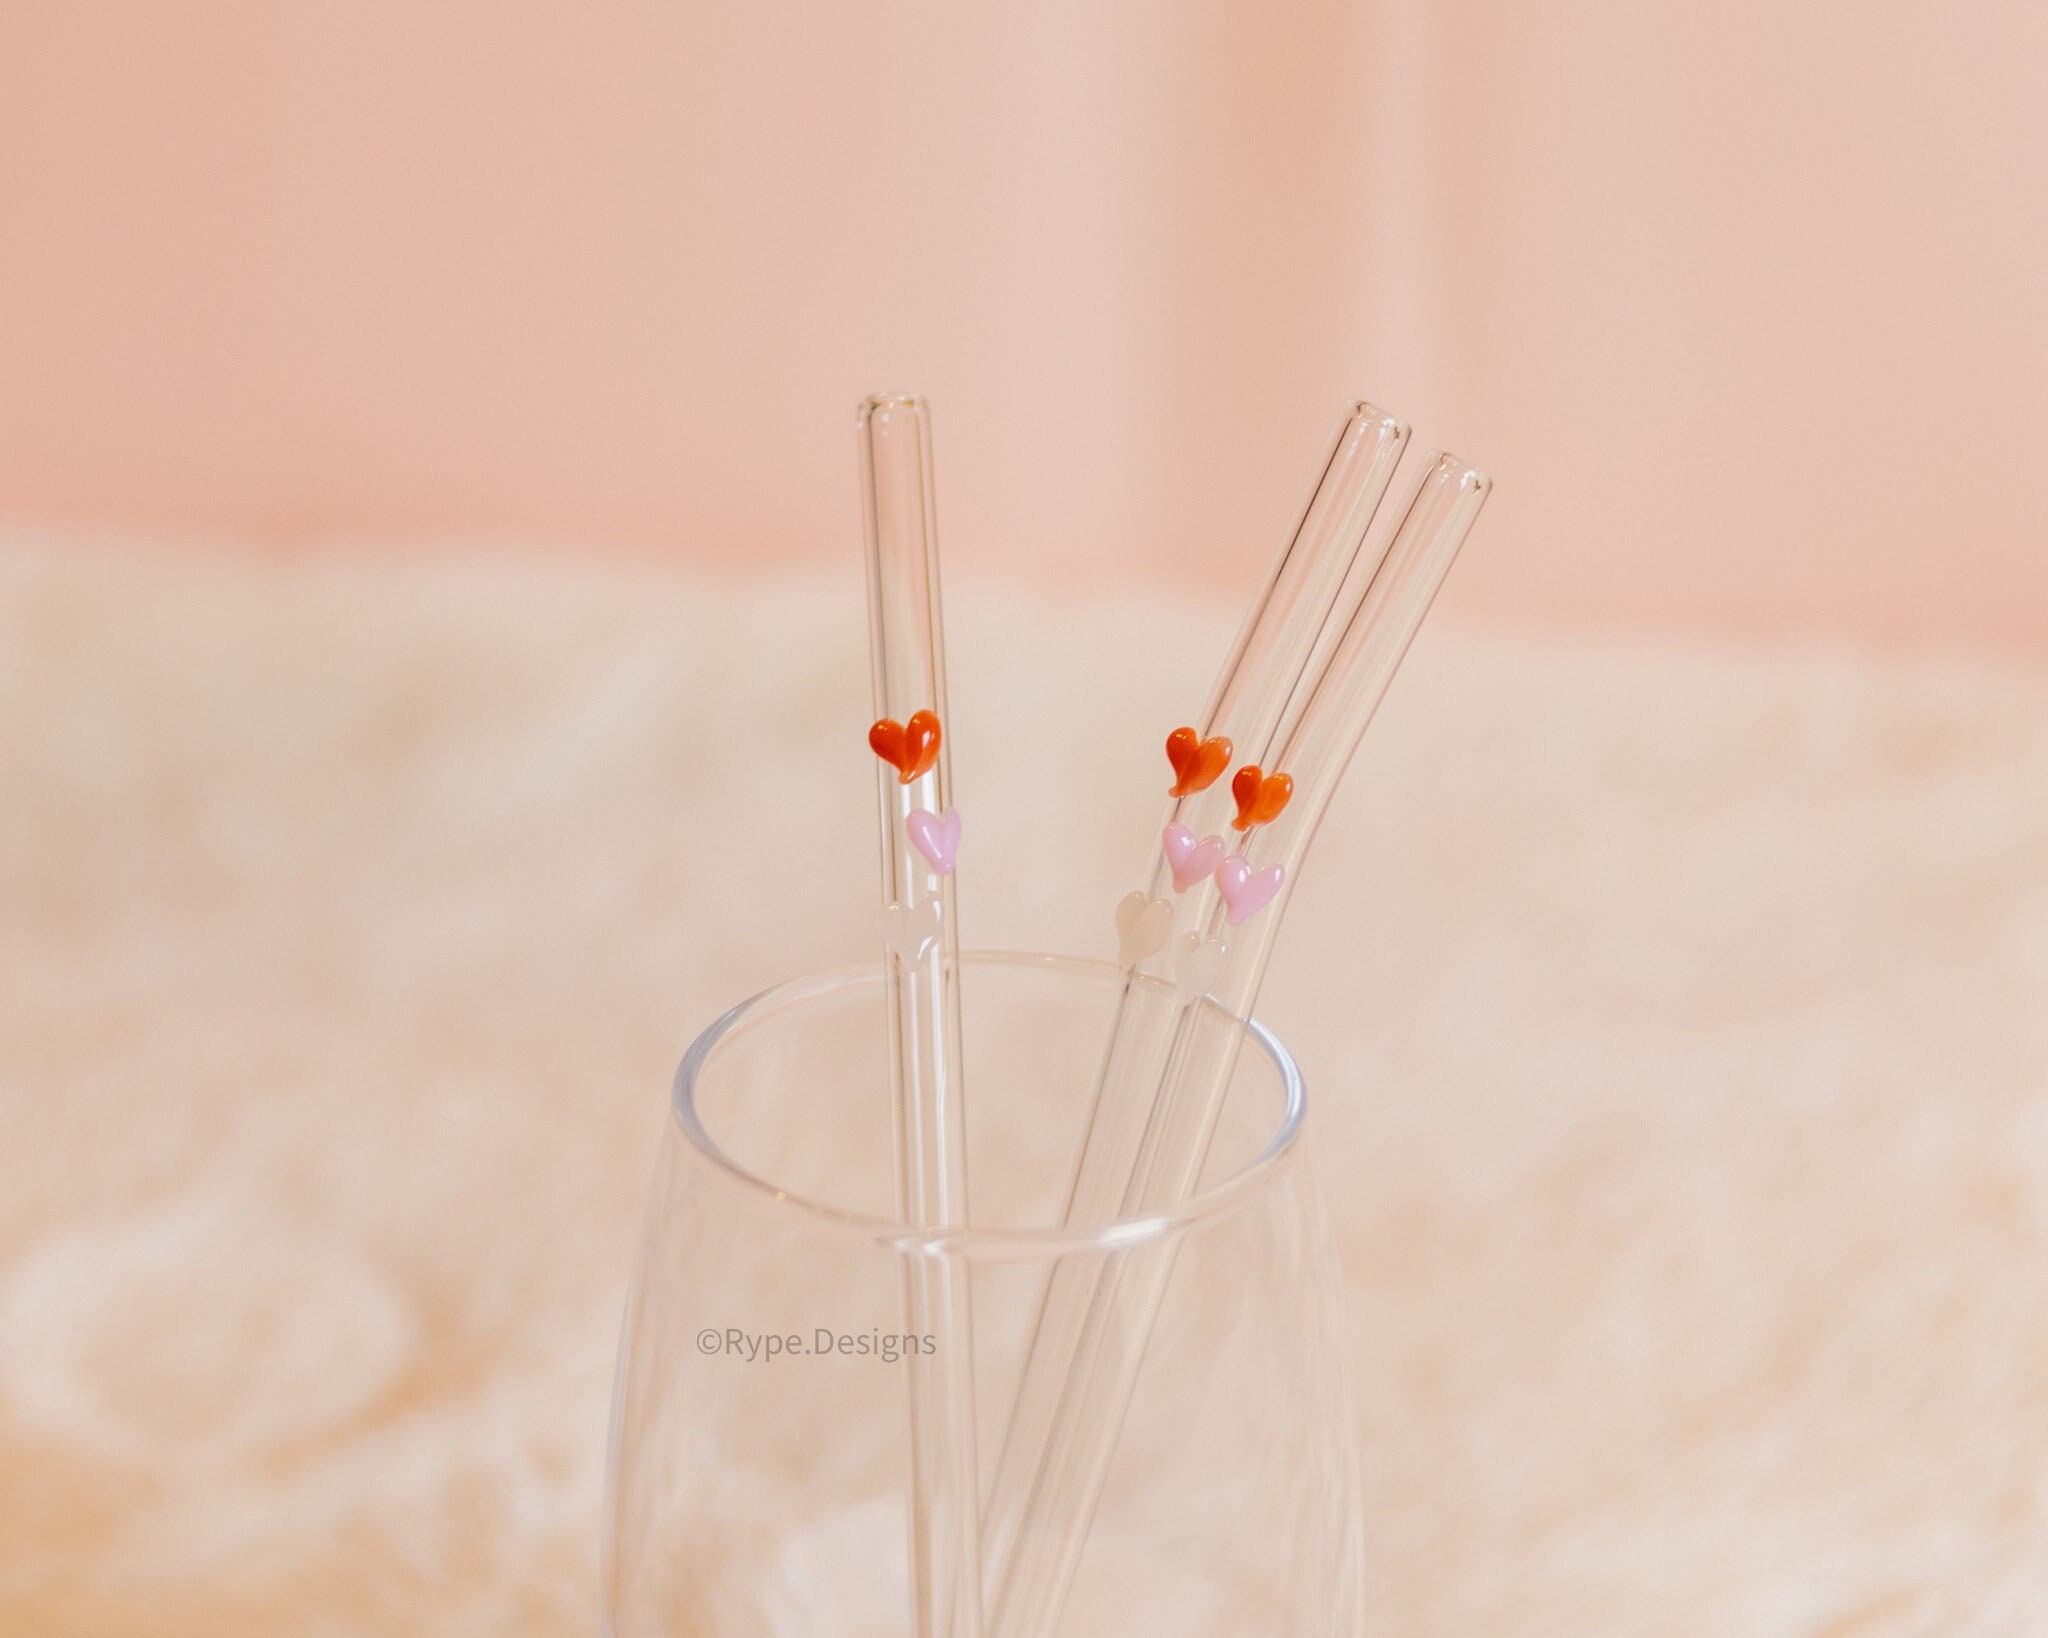 5 Pcs Reusable Glass Straws,Colorful Butterfly on Clear Straws With Design  7.9in X 8mm Shatter Resistant Bent Drinking Straws with 2 Cleaning Brushes